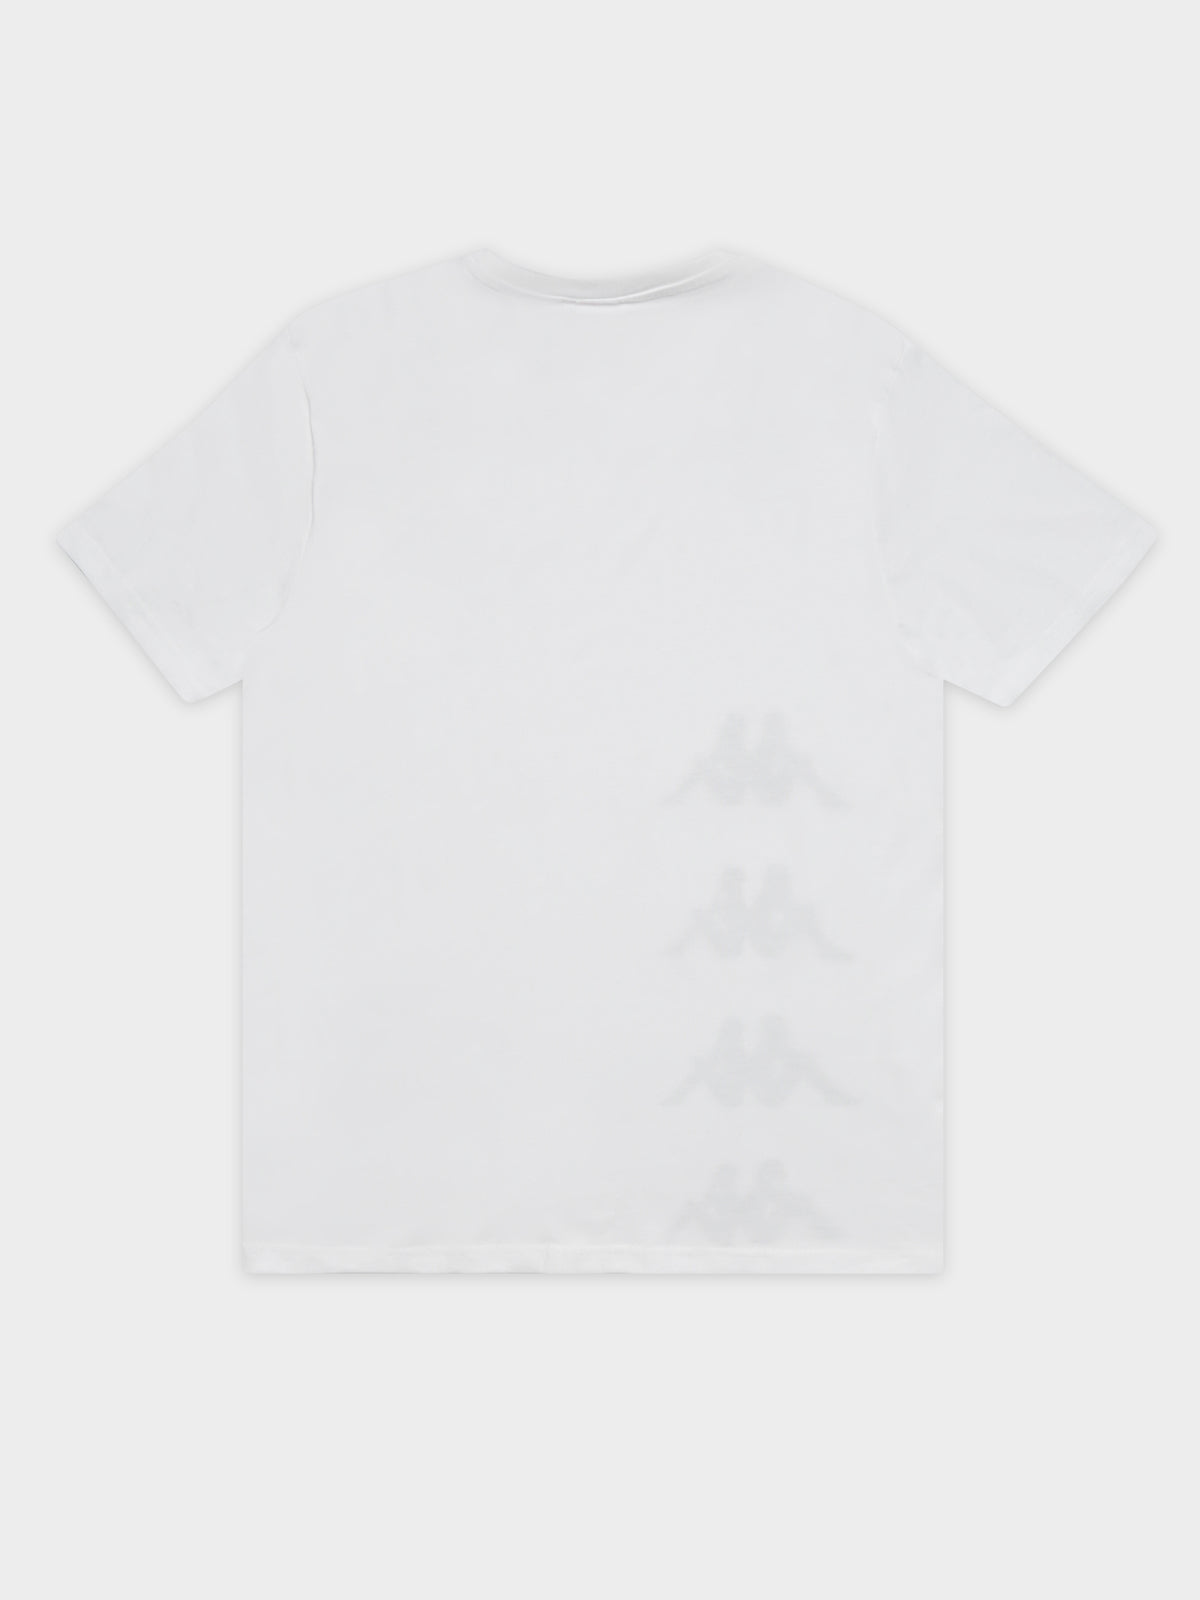 Authentic Starot T-Shirt in White